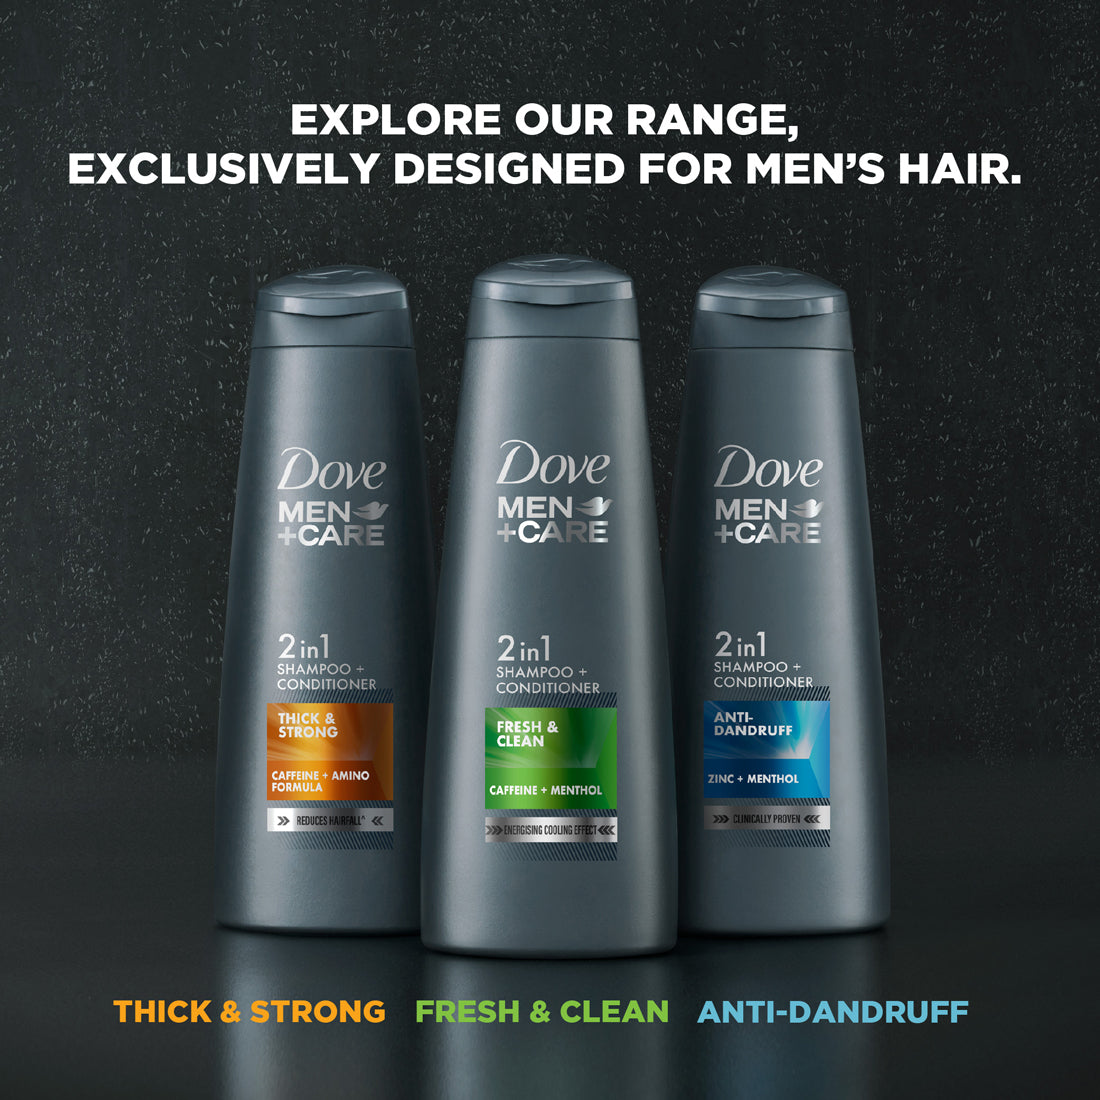 Dove Men+Care Fresh & Clean 2in1 Shampoo+Conditioner, 340 ml Combo (Pack of 3)